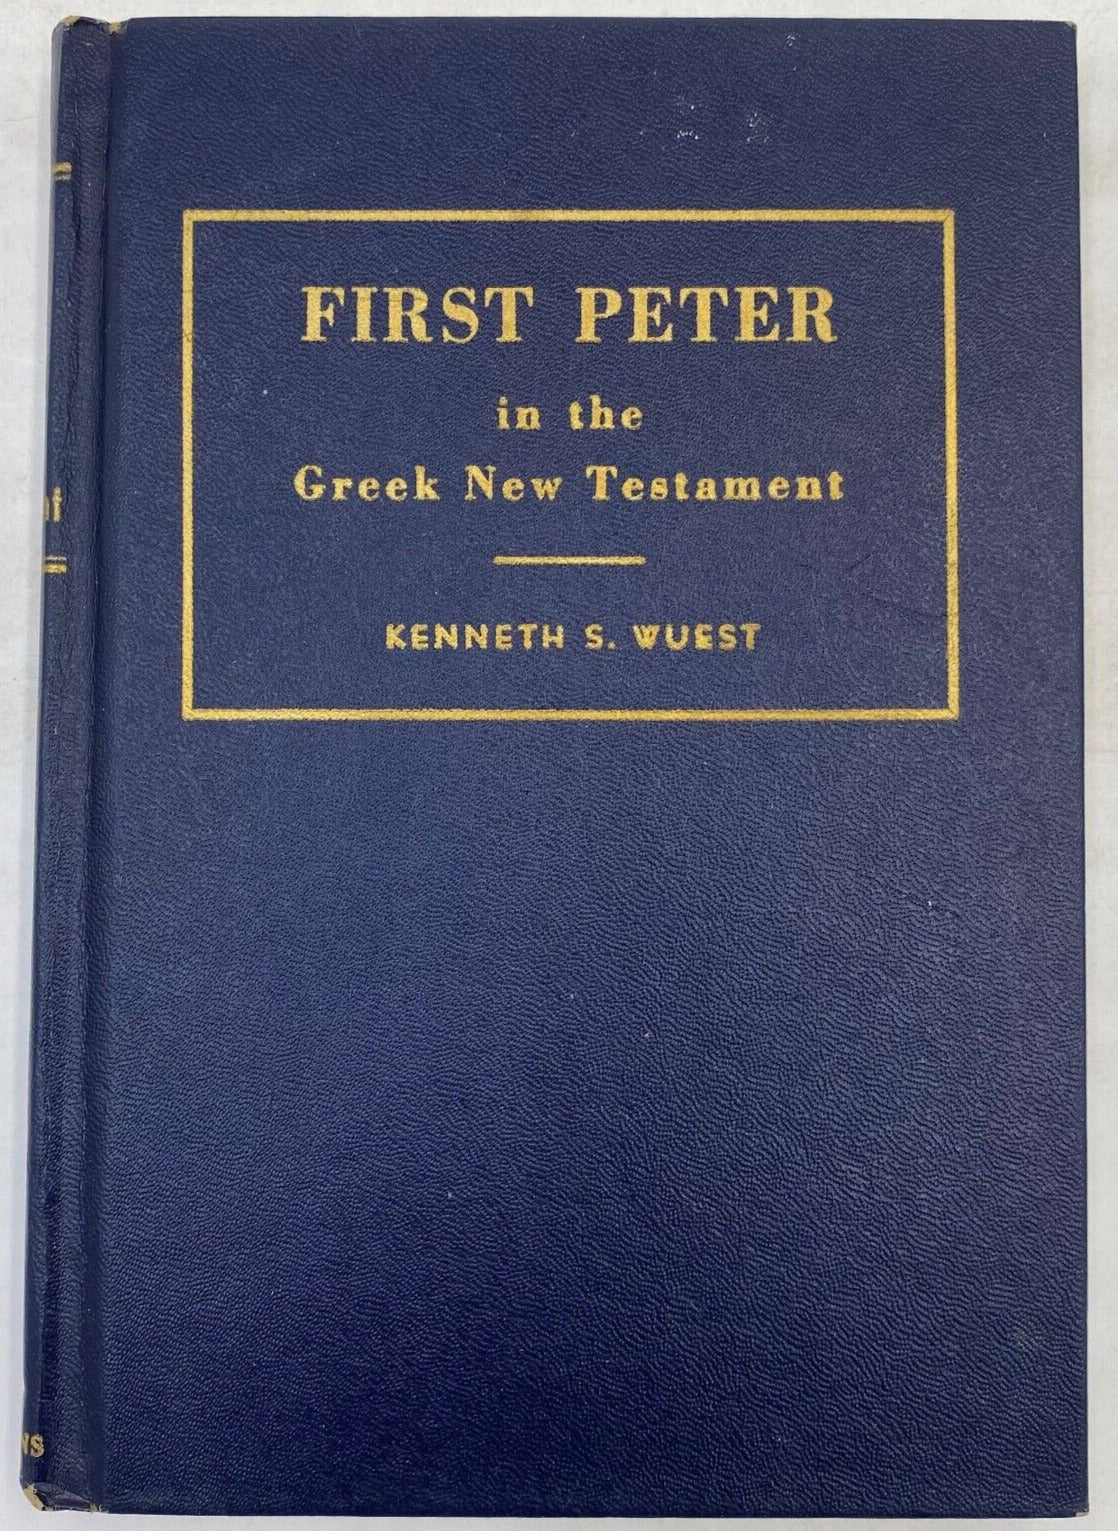 First Peter in the Greek New Testament by Kenneth S. Wuest (1956, Hardcover)